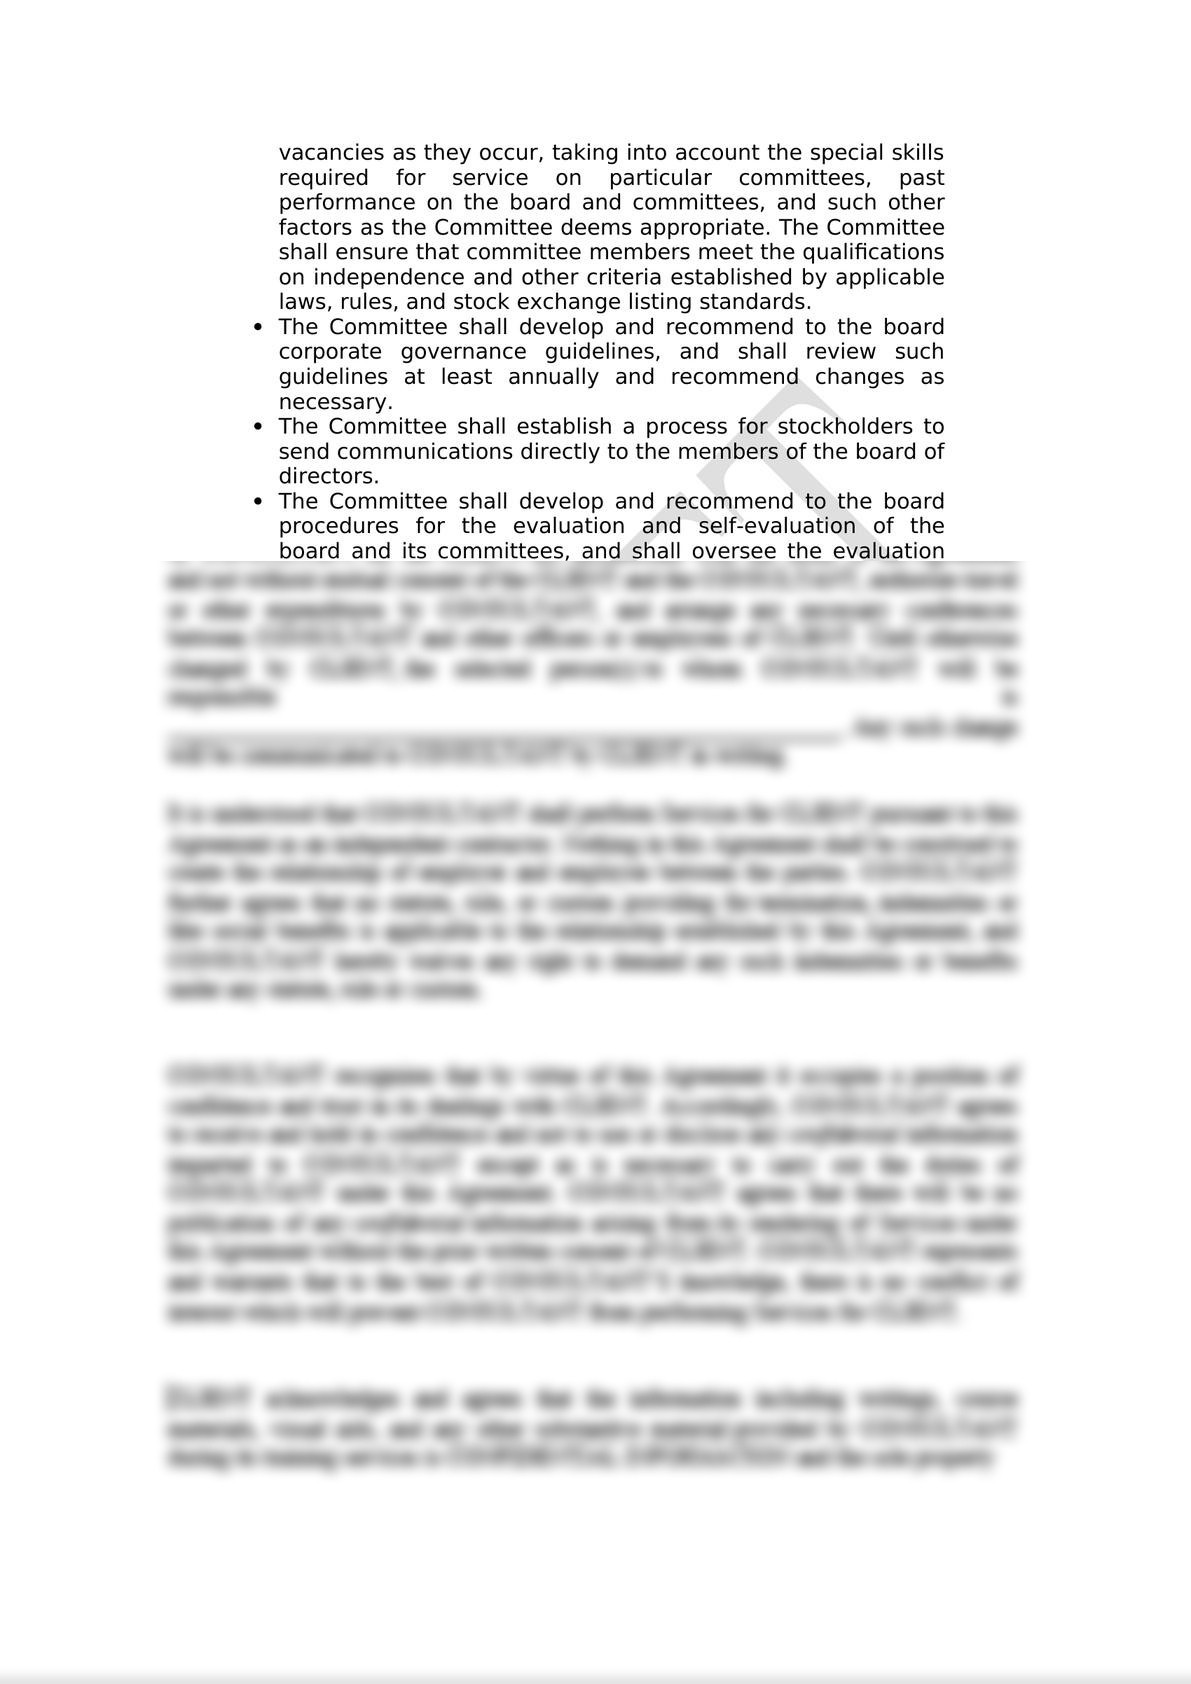 Governance & Nomination Committee Charter-2